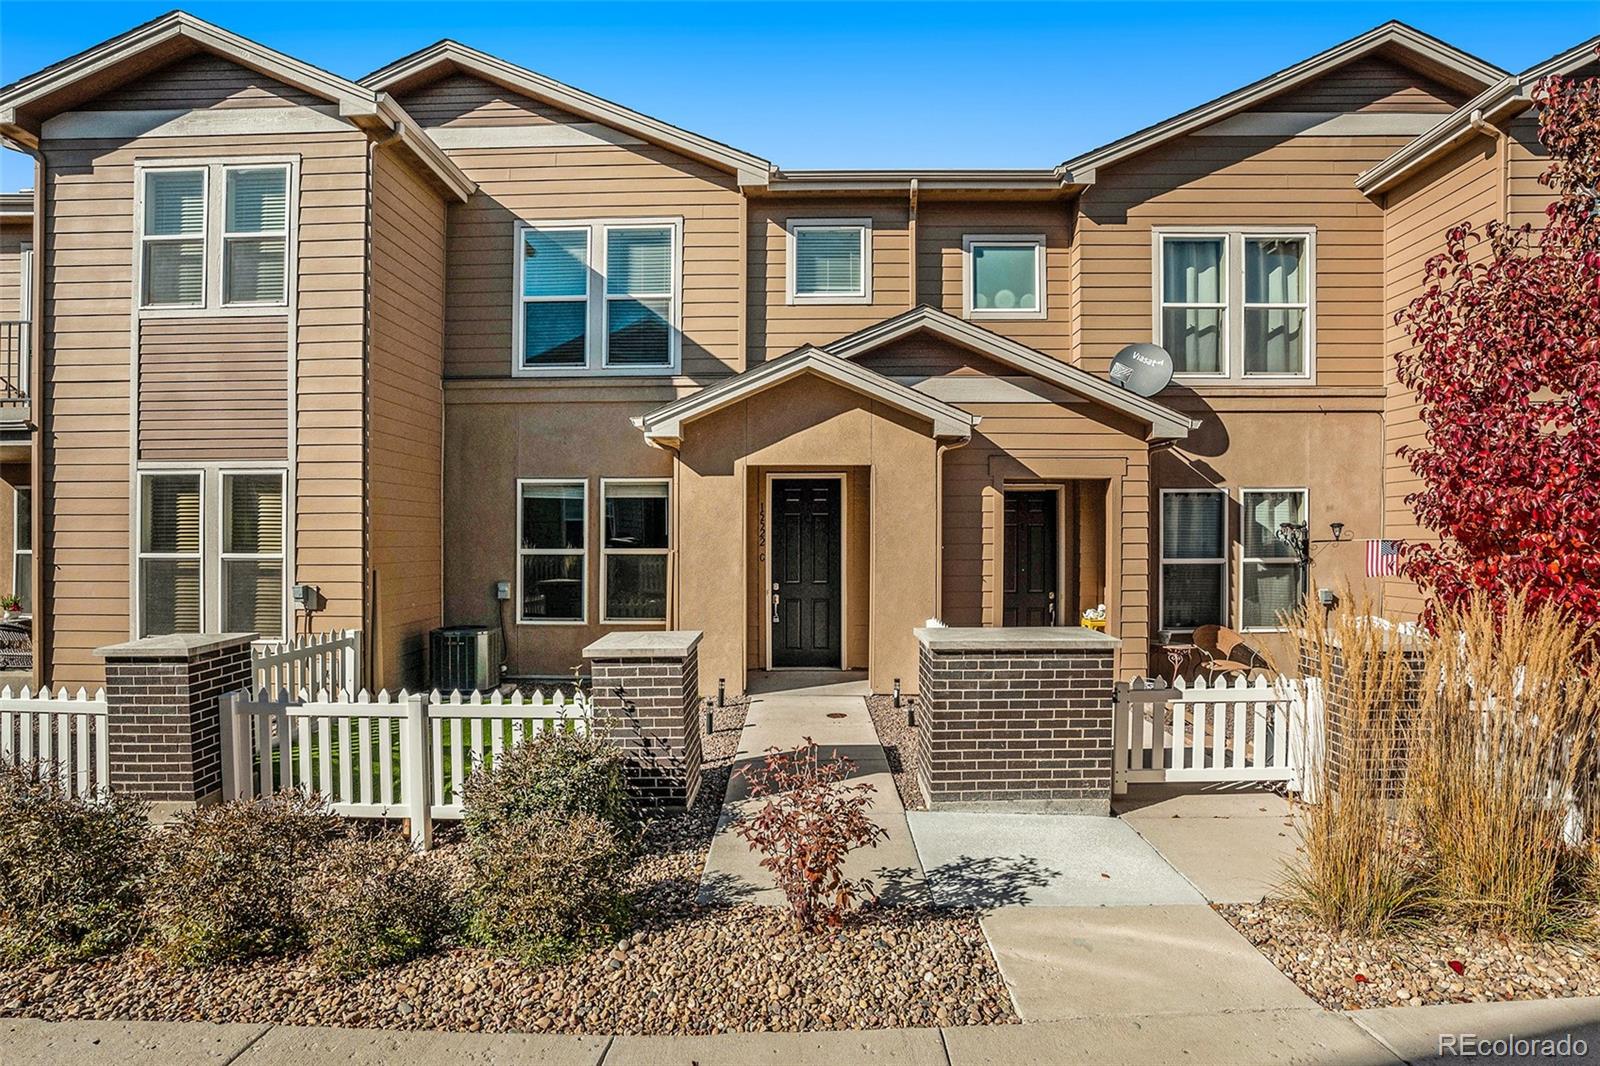 15522 w 65th avenue, arvada sold home. Closed on 2024-01-12 for $506,500.